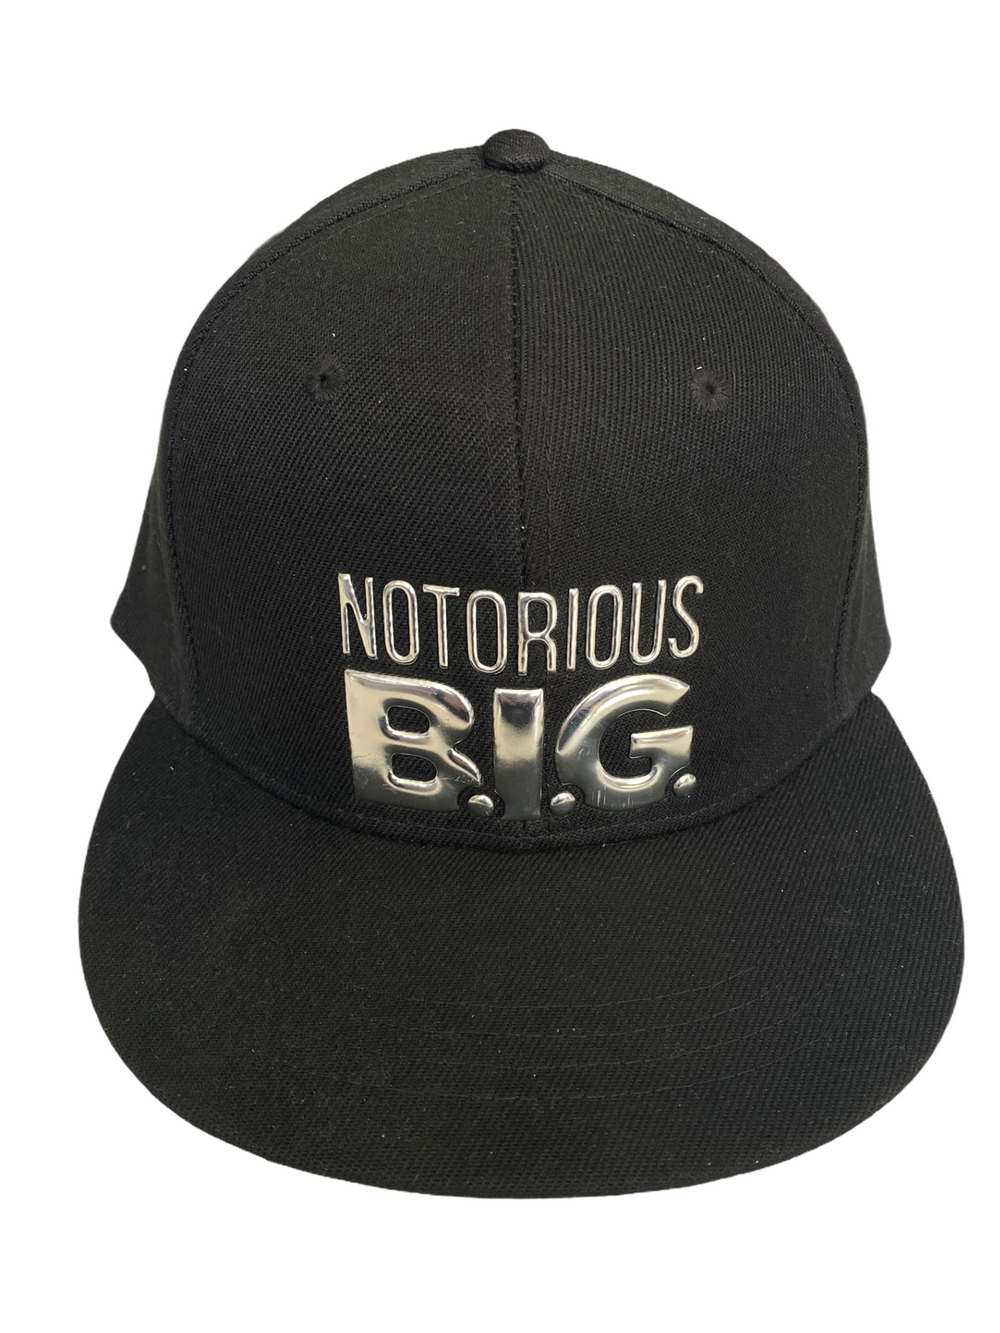 Notorious B.I.G. Official Flat Snapback Cap Adjustable Brand New Sonic Silver Applique